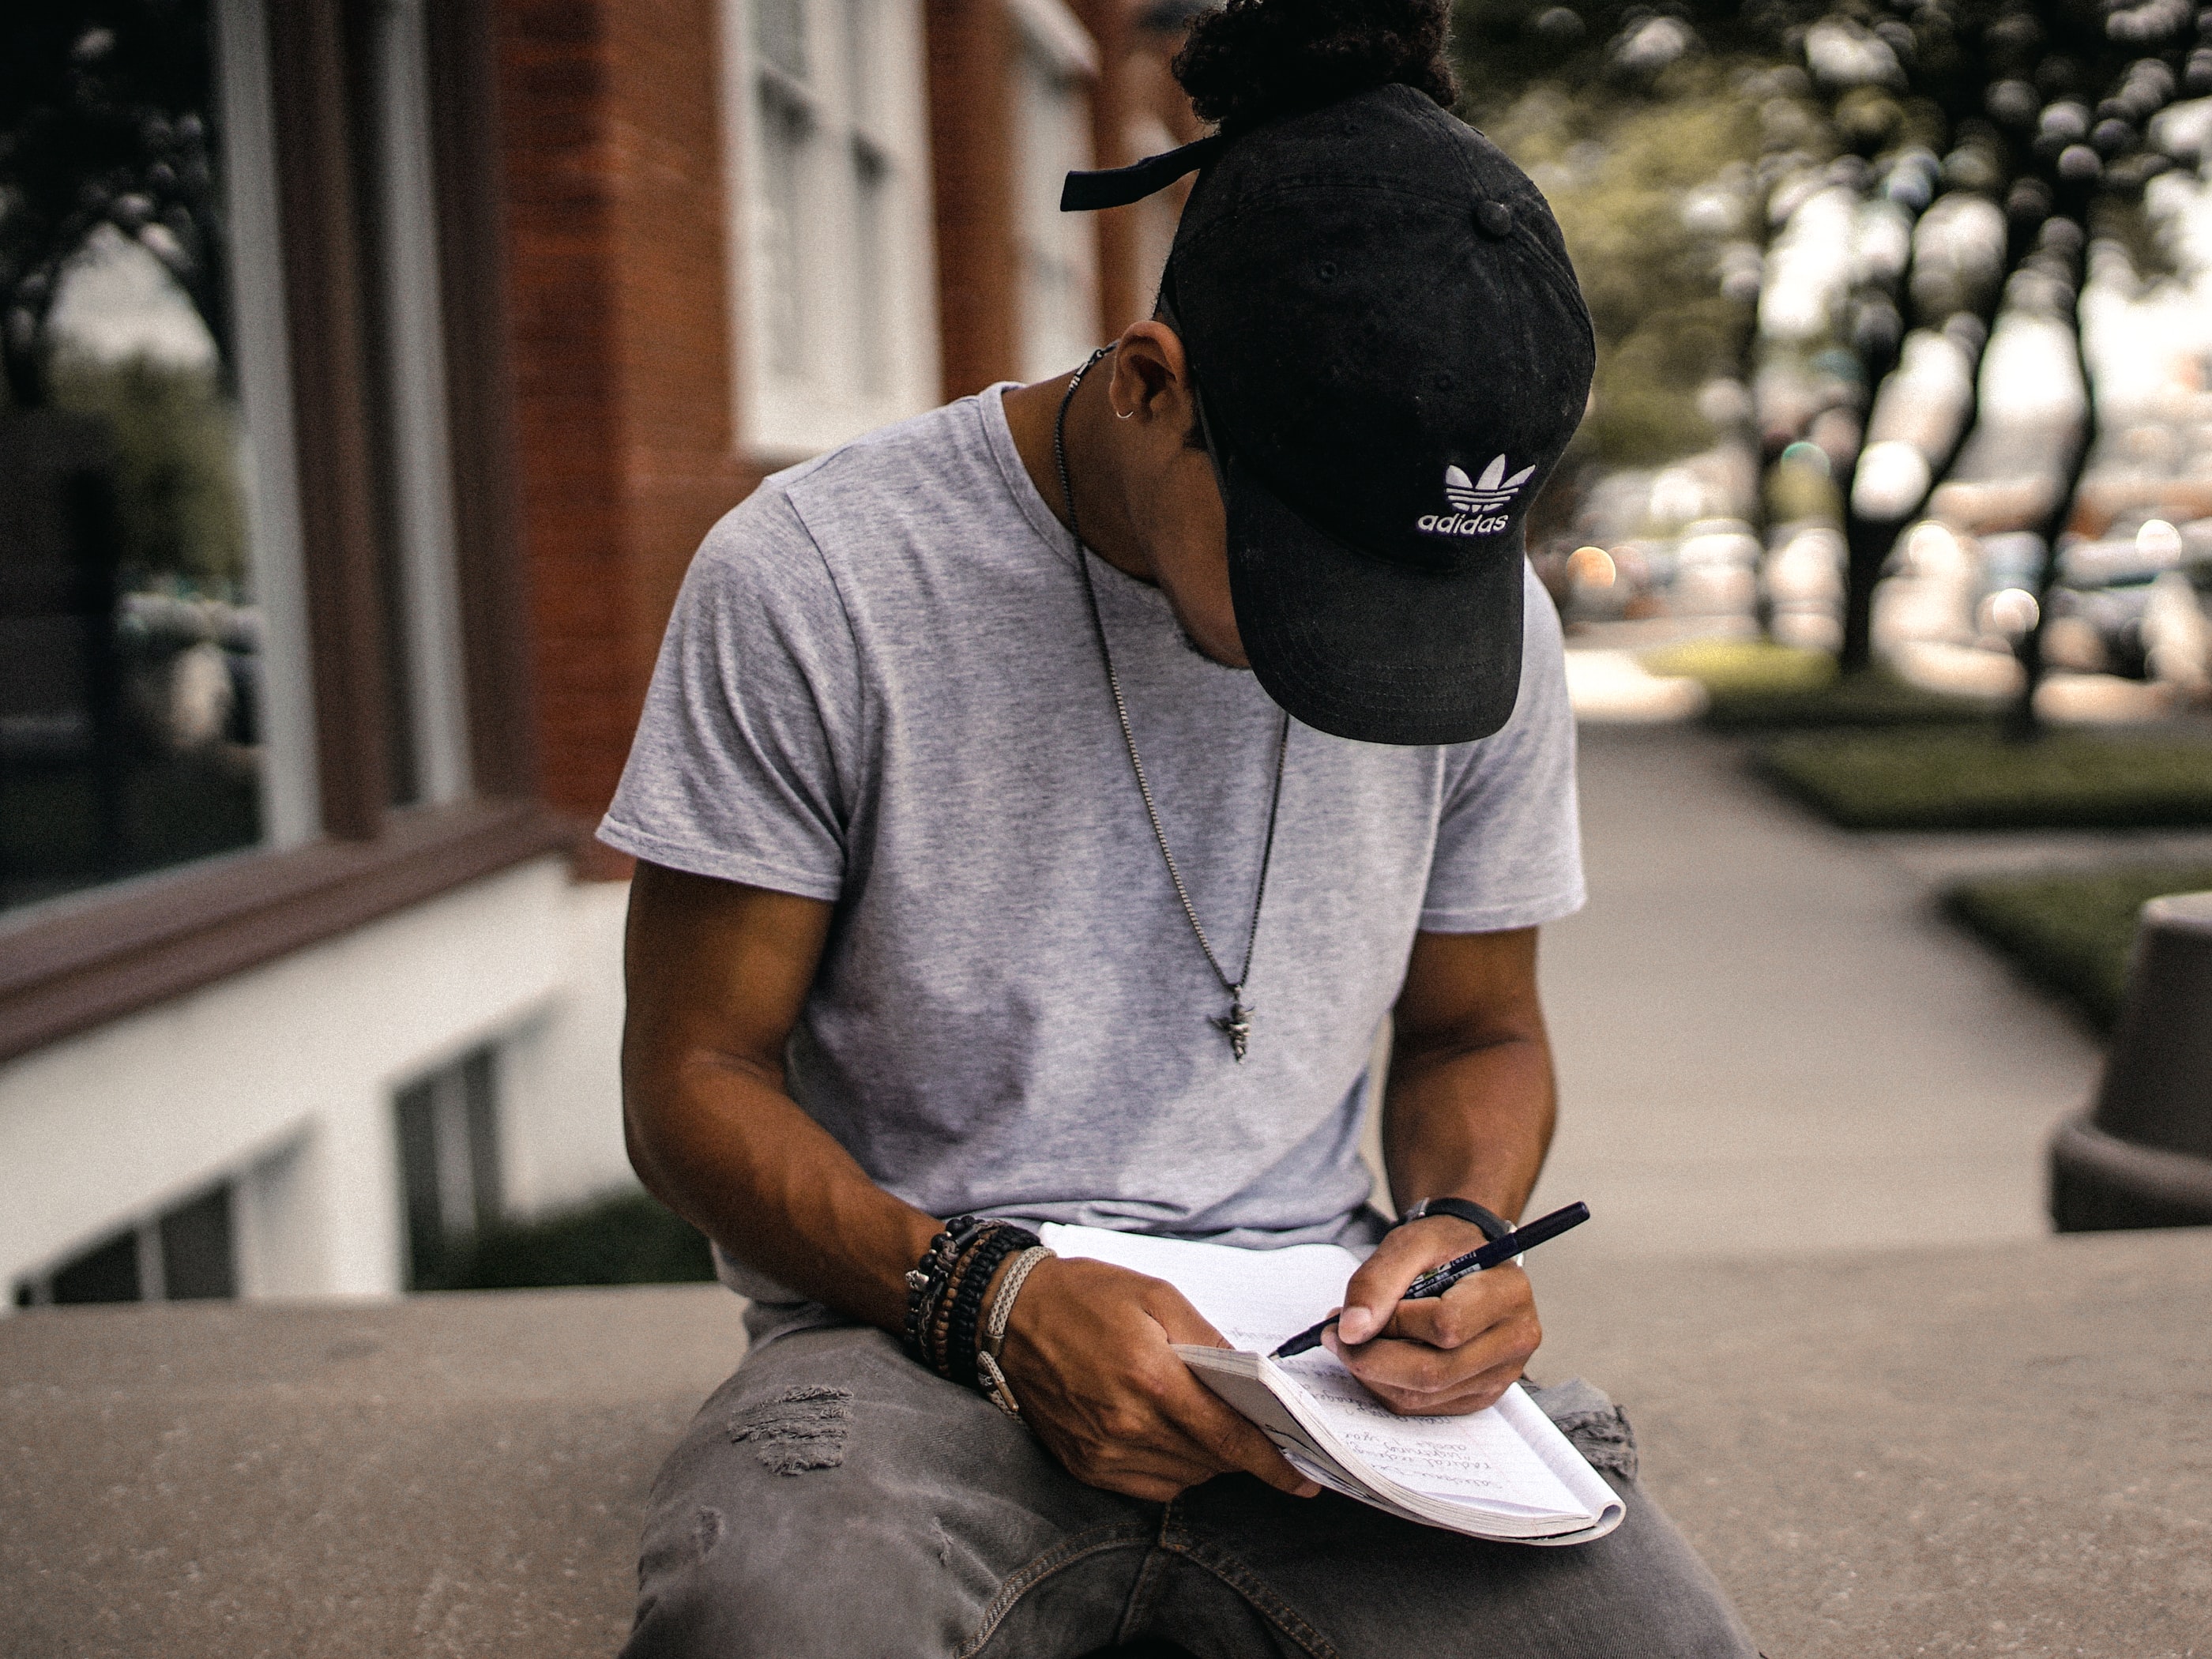 man writing in notebook